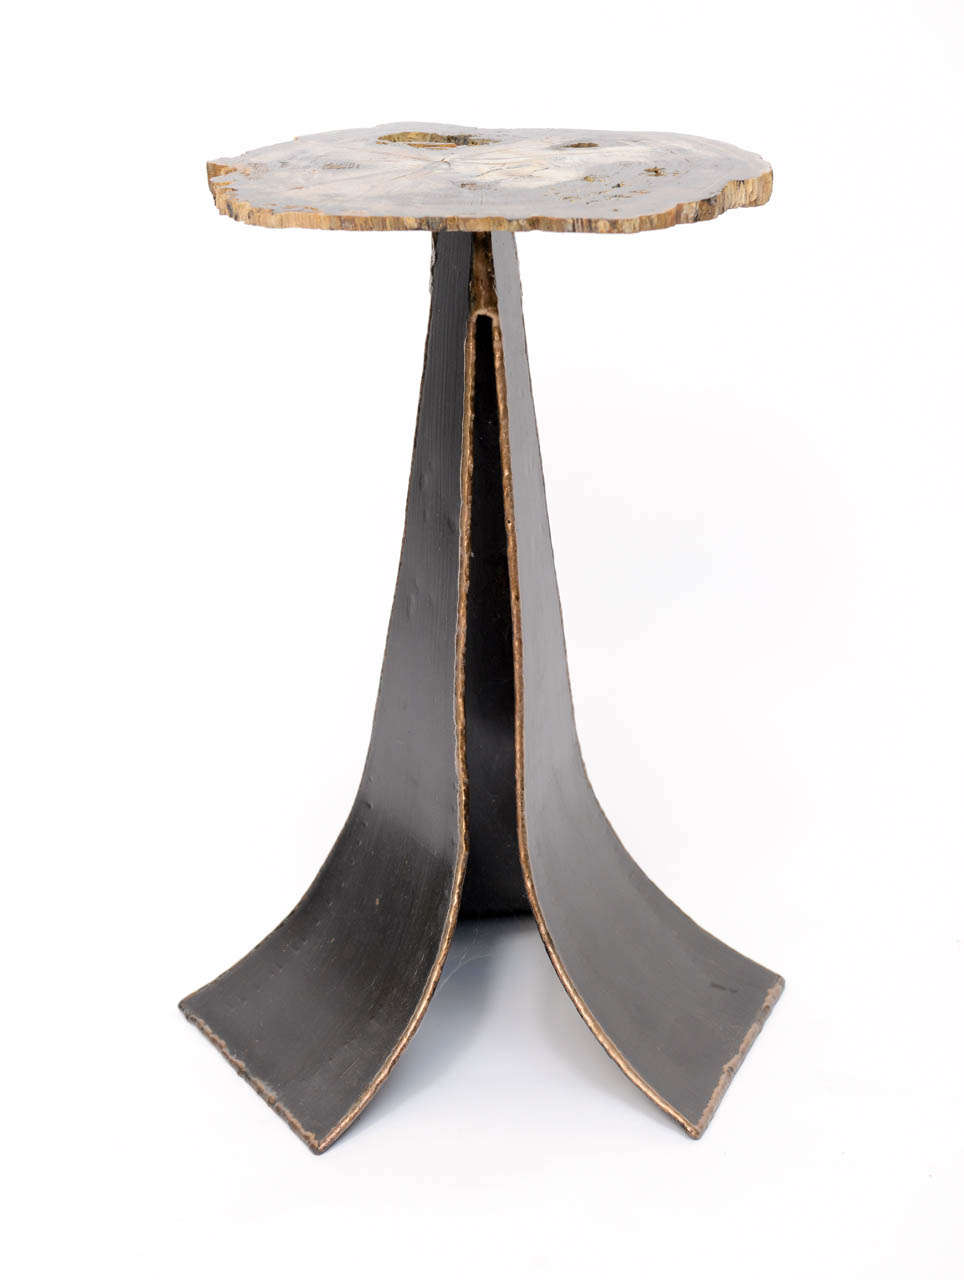 Petrified cedar top table on iron base. Perfect as an accent in the Brutal style.